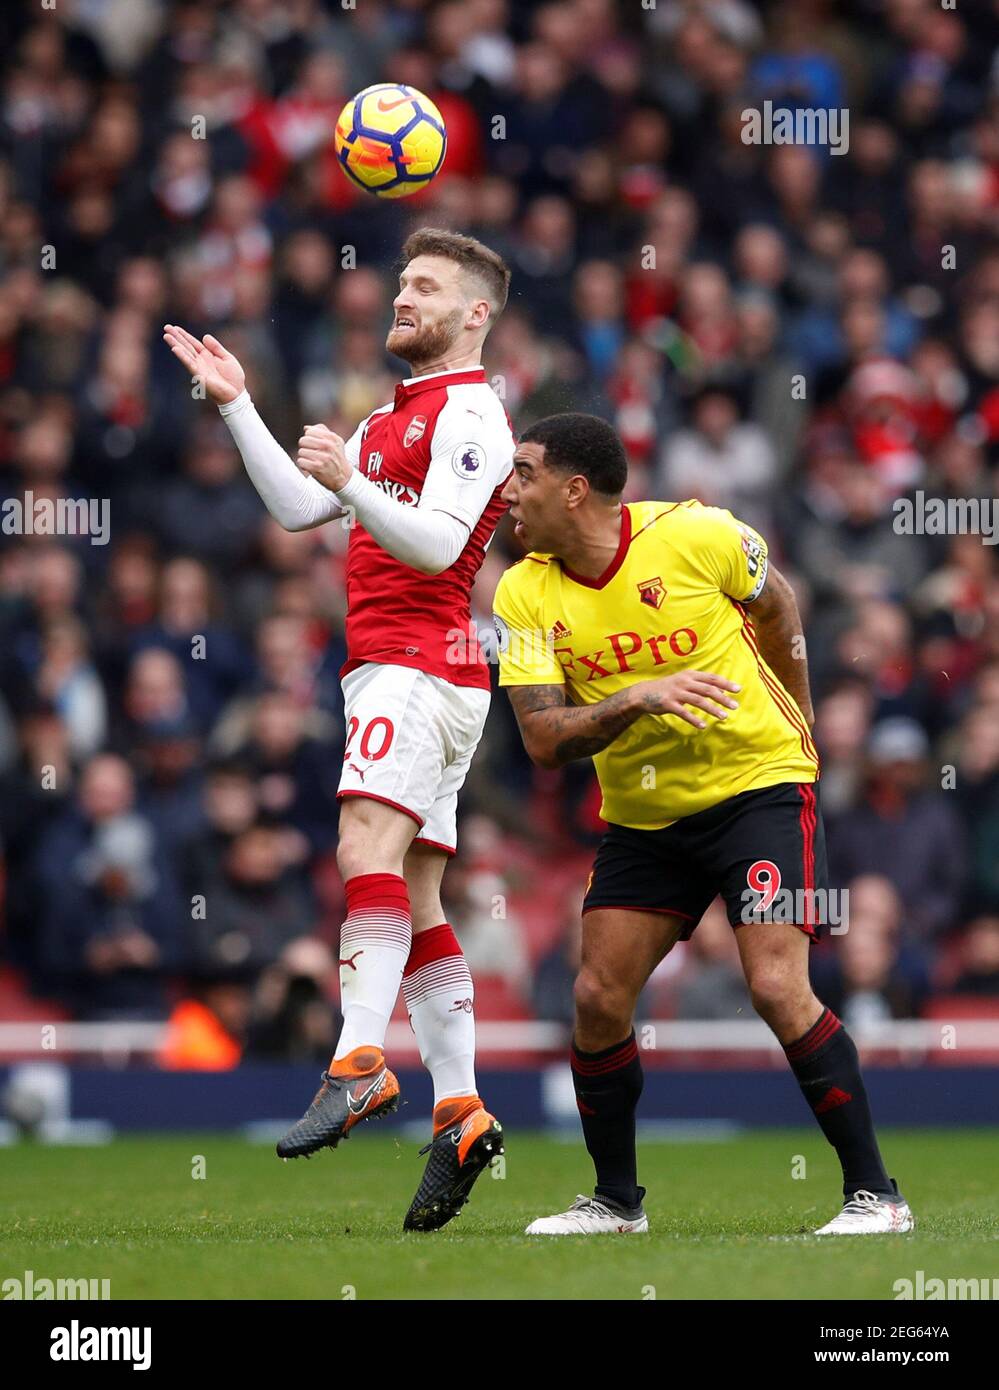 Soccer Football - Premier League - Arsenal vs Watford - Emirates Stadium, London, Britain - March 11, 2018   Arsenal's Shkodran Mustafi in action with Watford's Troy Deeney                REUTERS/Eddie Keogh    EDITORIAL USE ONLY. No use with unauthorized audio, video, data, fixture lists, club/league logos or "live" services. Online in-match use limited to 75 images, no video emulation. No use in betting, games or single club/league/player publications.  Please contact your account representative for further details. Stock Photo